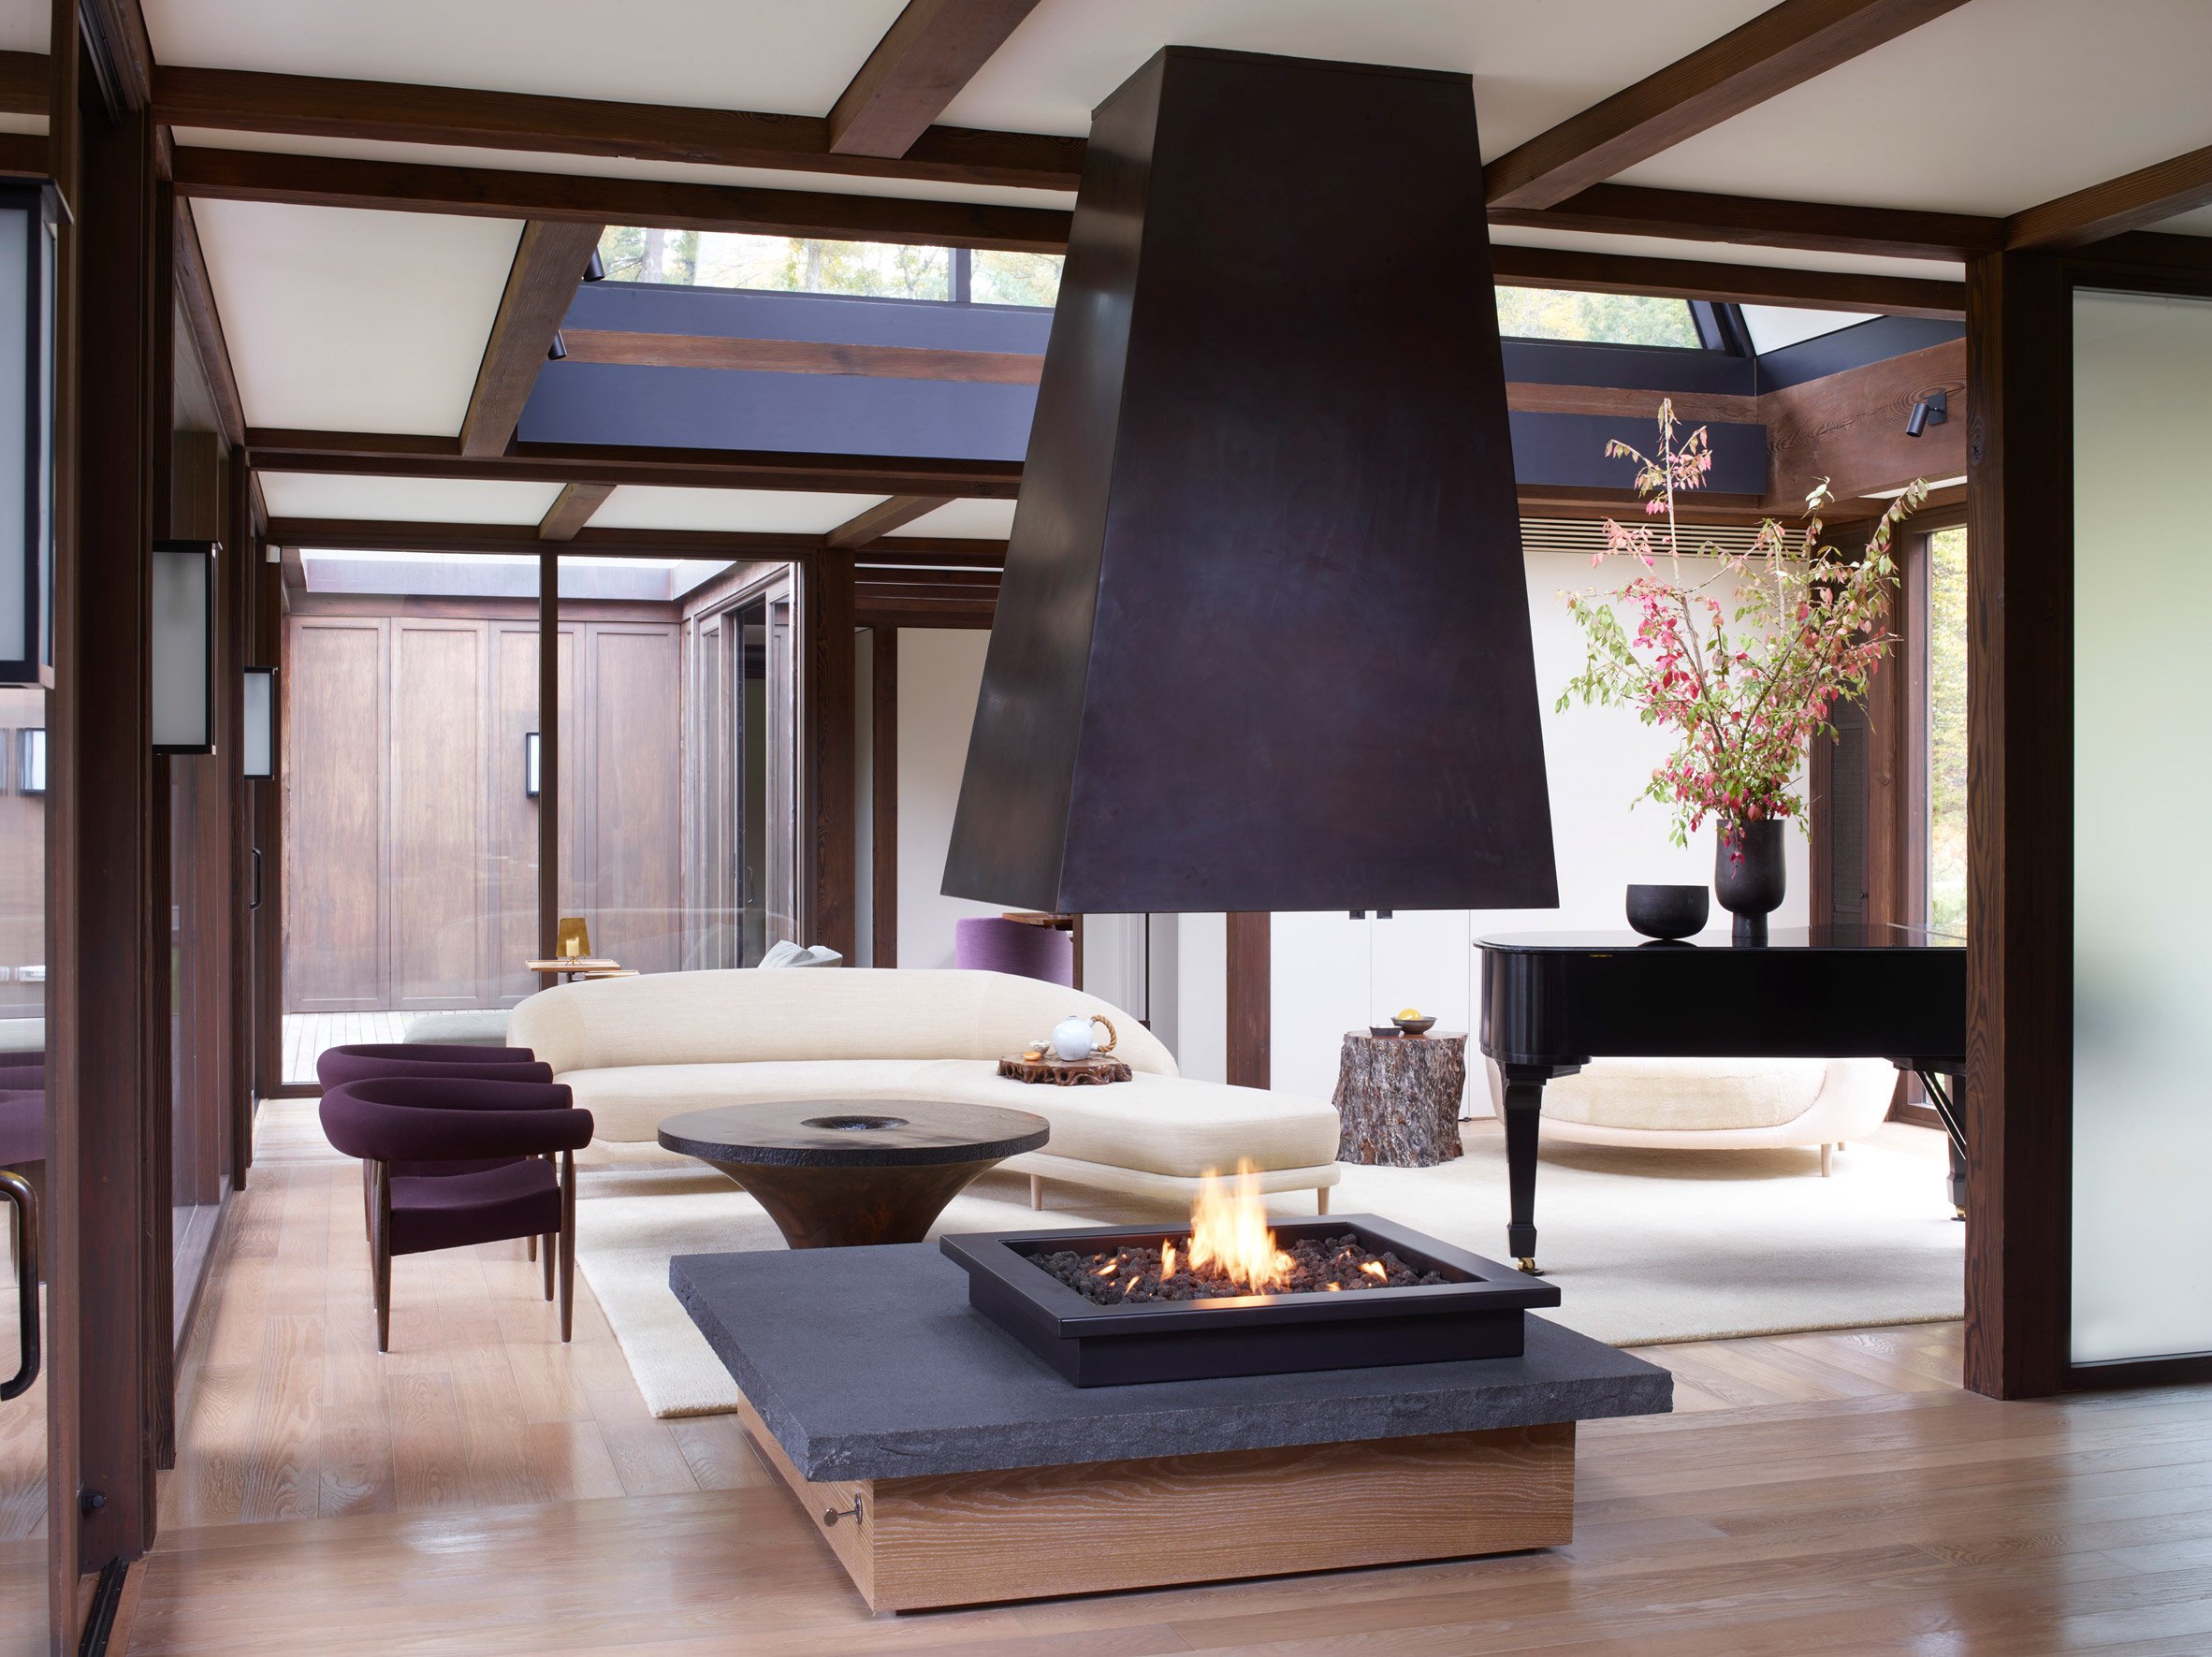 Living space with Japanese informed fireplace